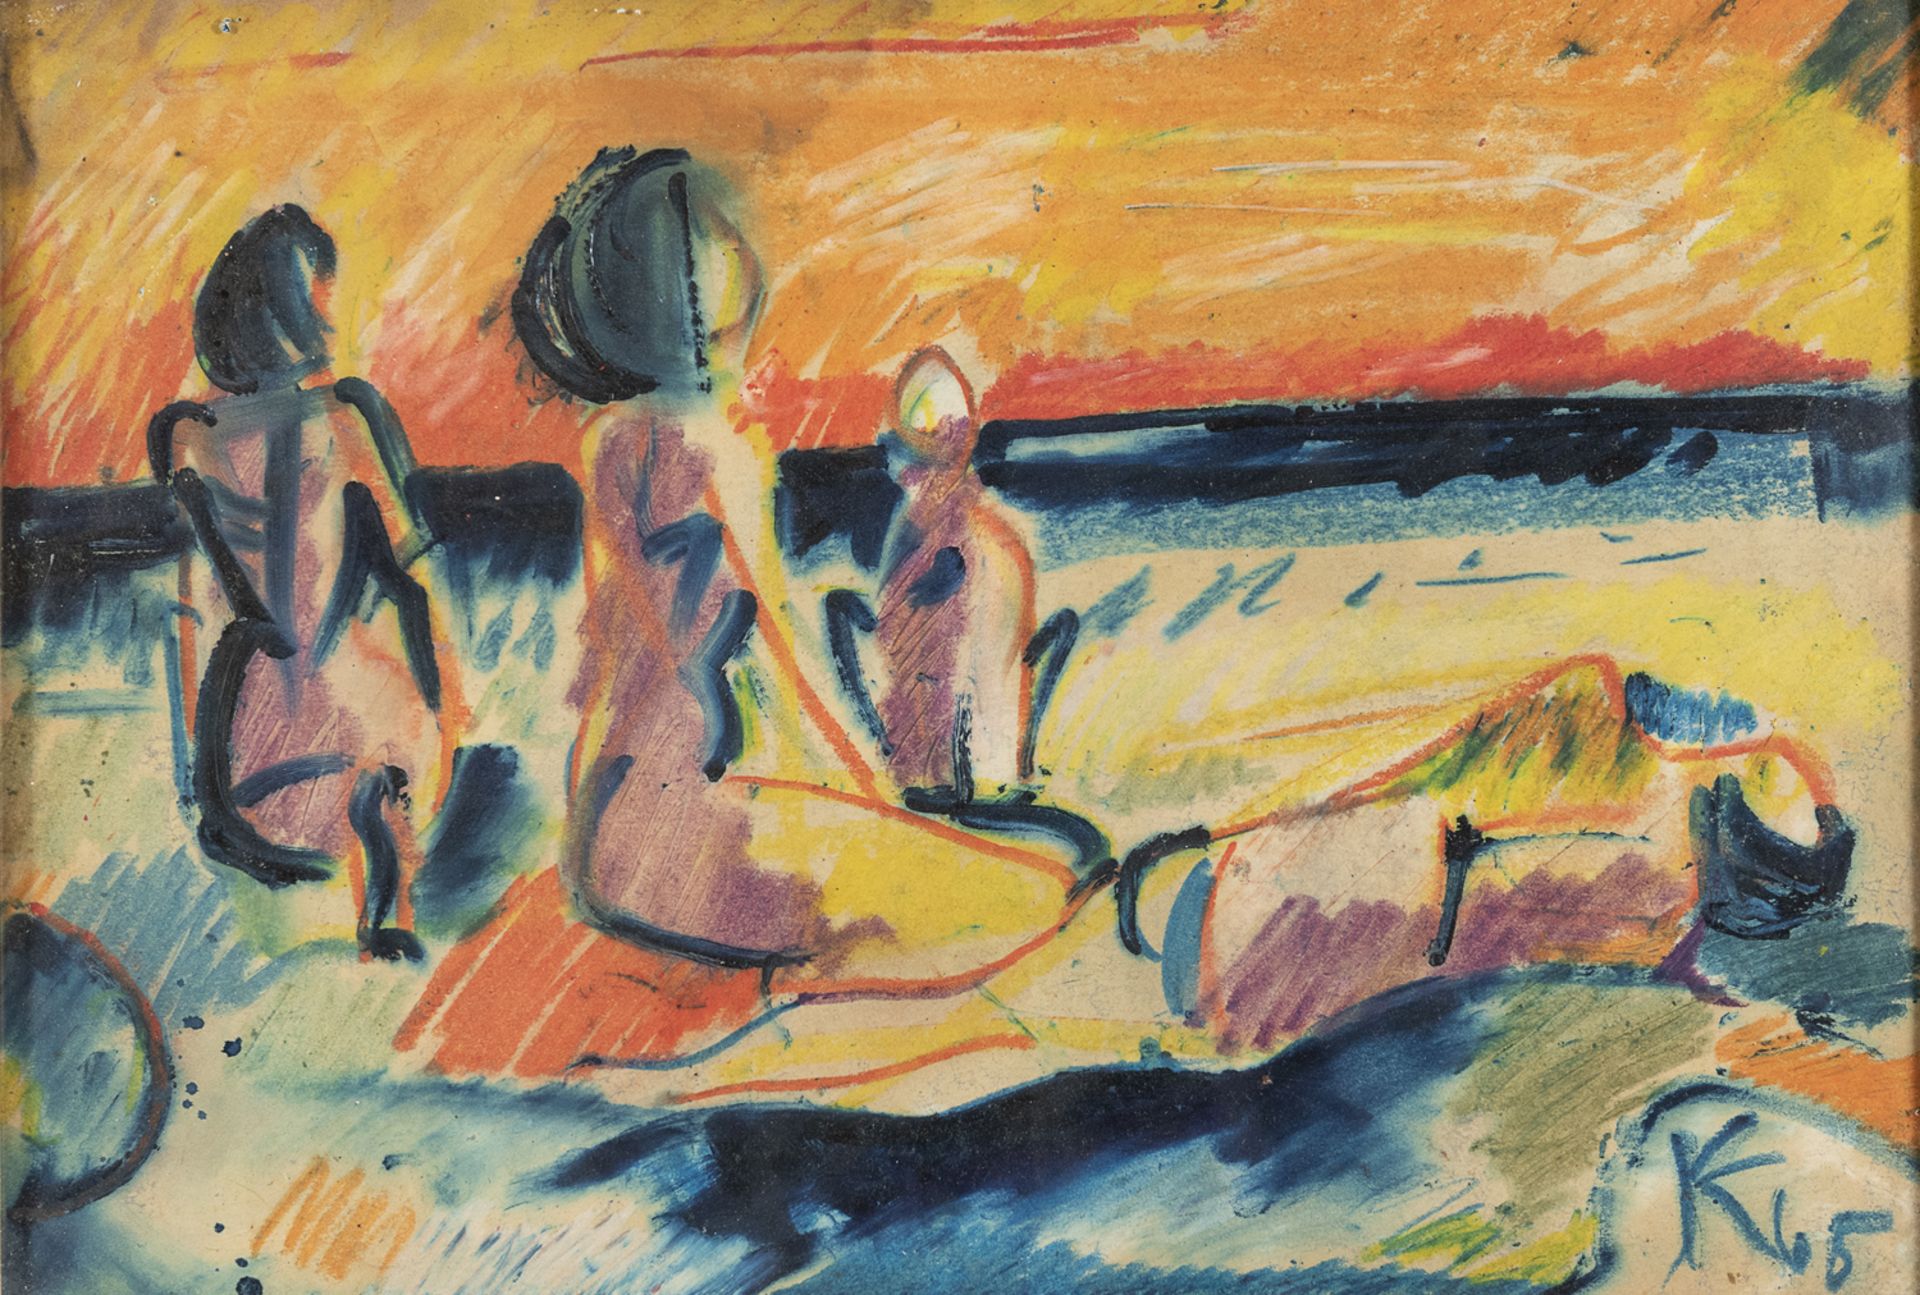 WAX PASTELS AND MIXED MEDIA BY PAINTER OF THE 20TH CENTURY